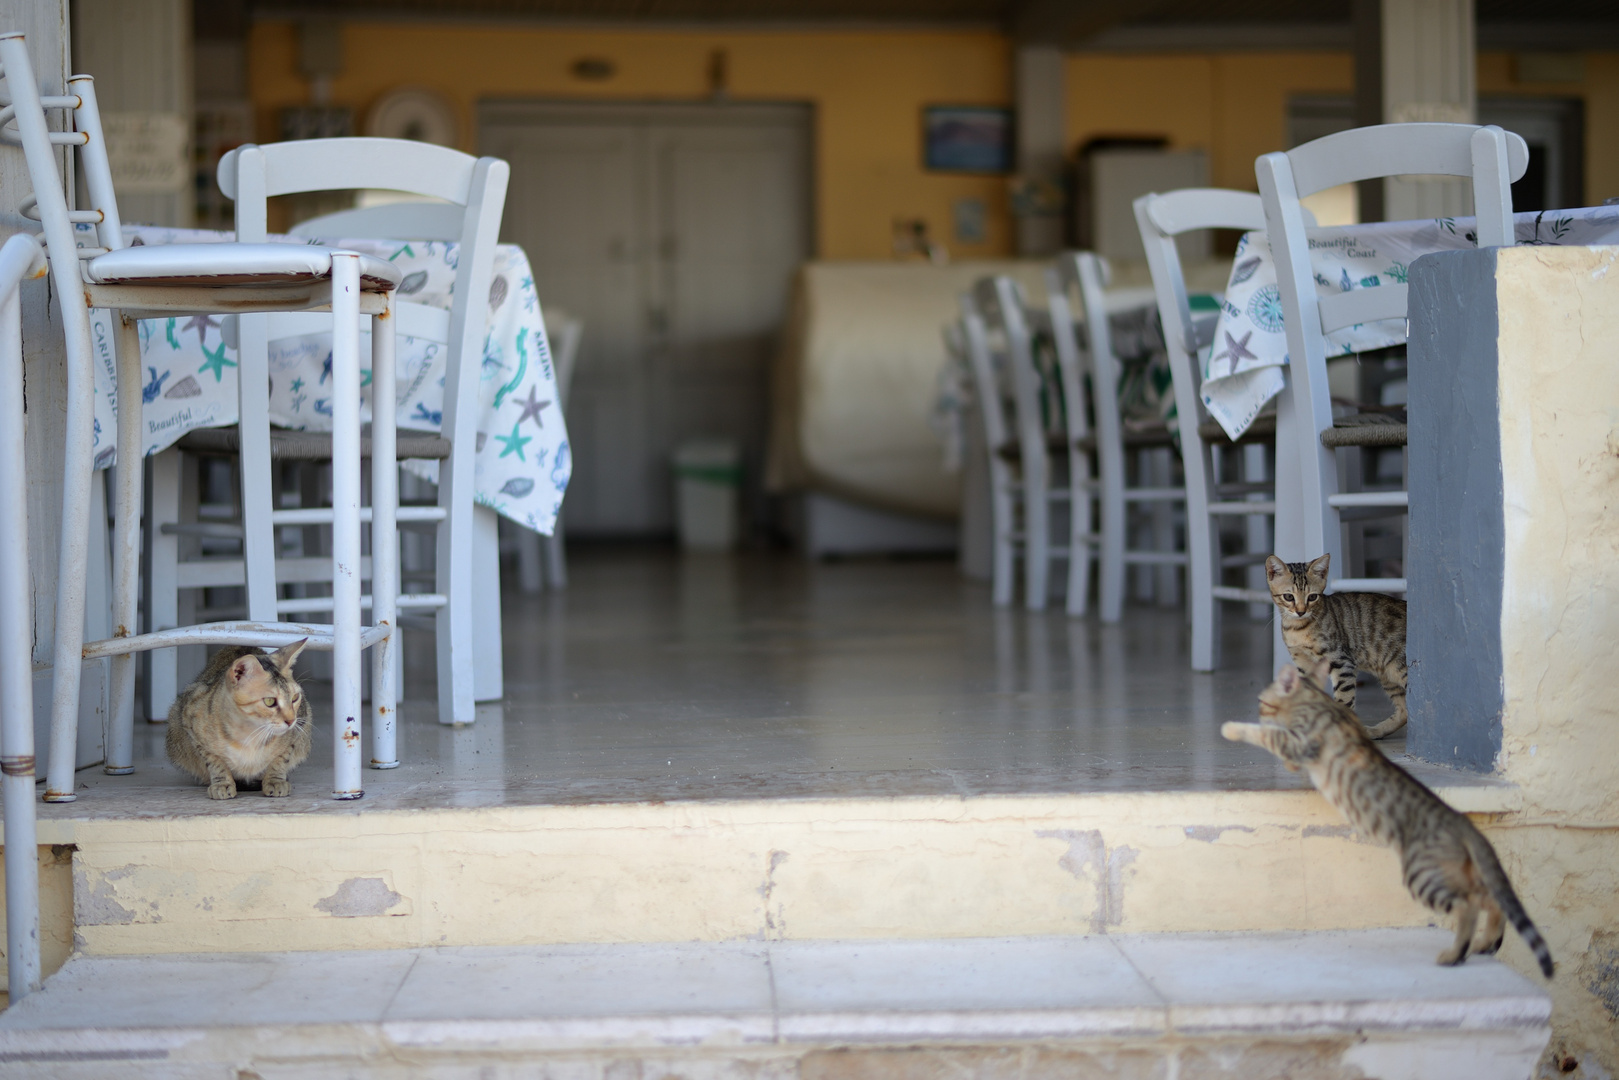 Cats in front of the restaurant